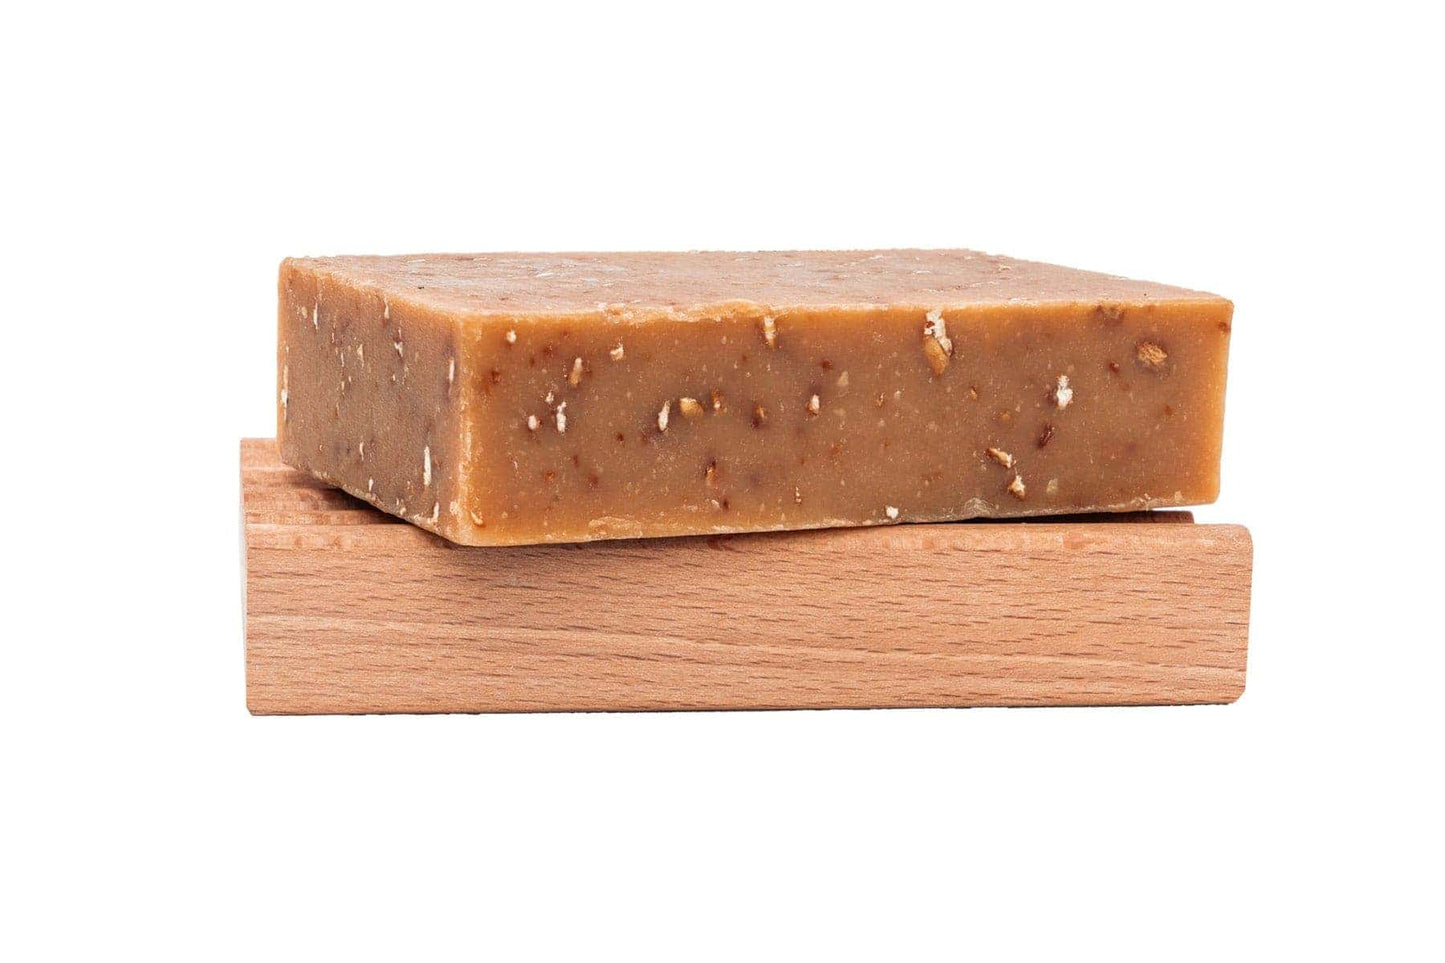 Unwrapped bar of oatmeal and honey goat milk soap on an all natural wood soap dish